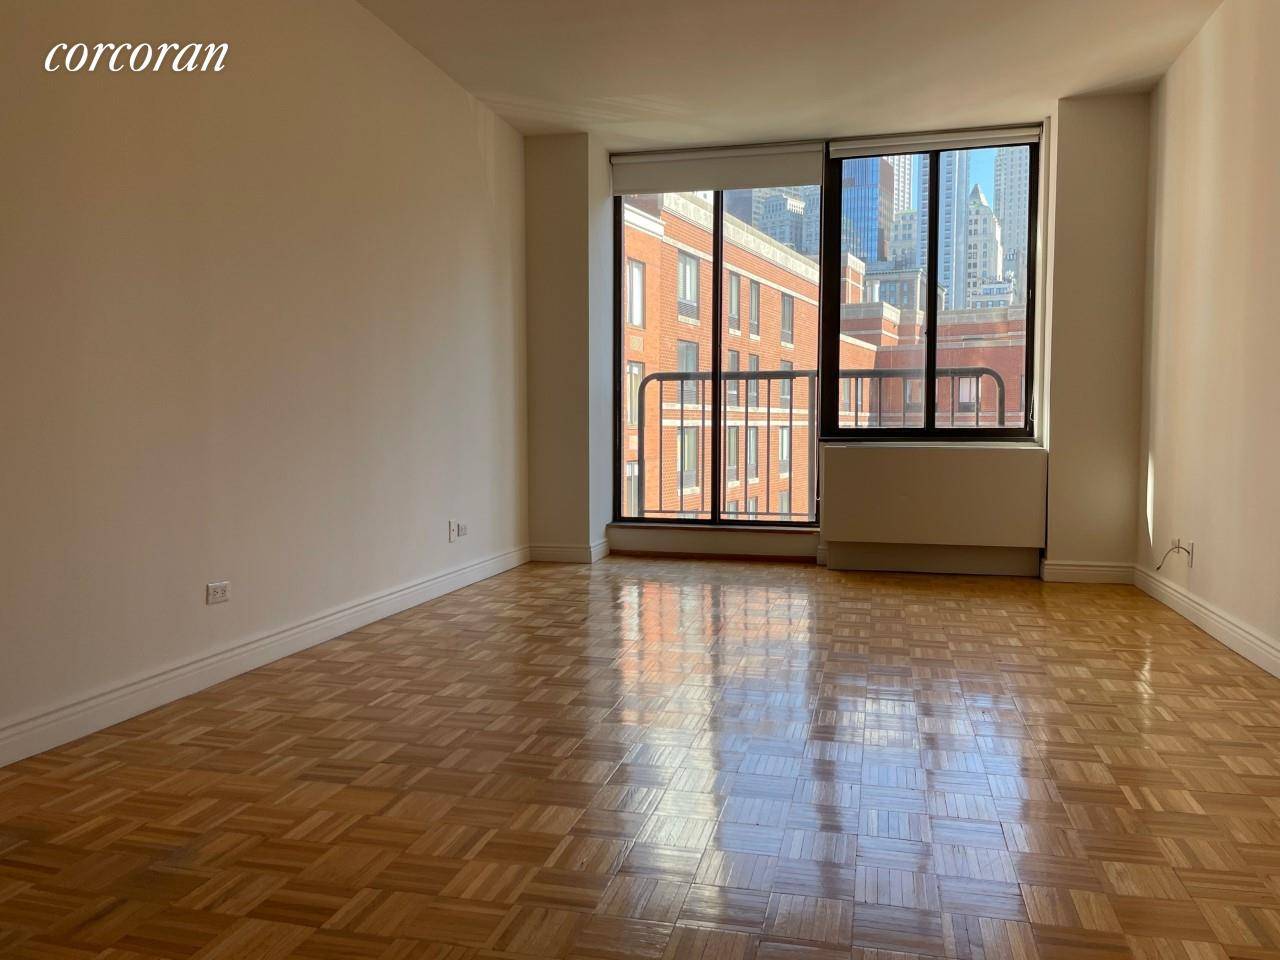 Bright one bedroom with Juliet balcony Liberty Terrace is distinctly situated on the Hudson River Waterfront and Park connecting to running and bike paths that extend along more than 4.